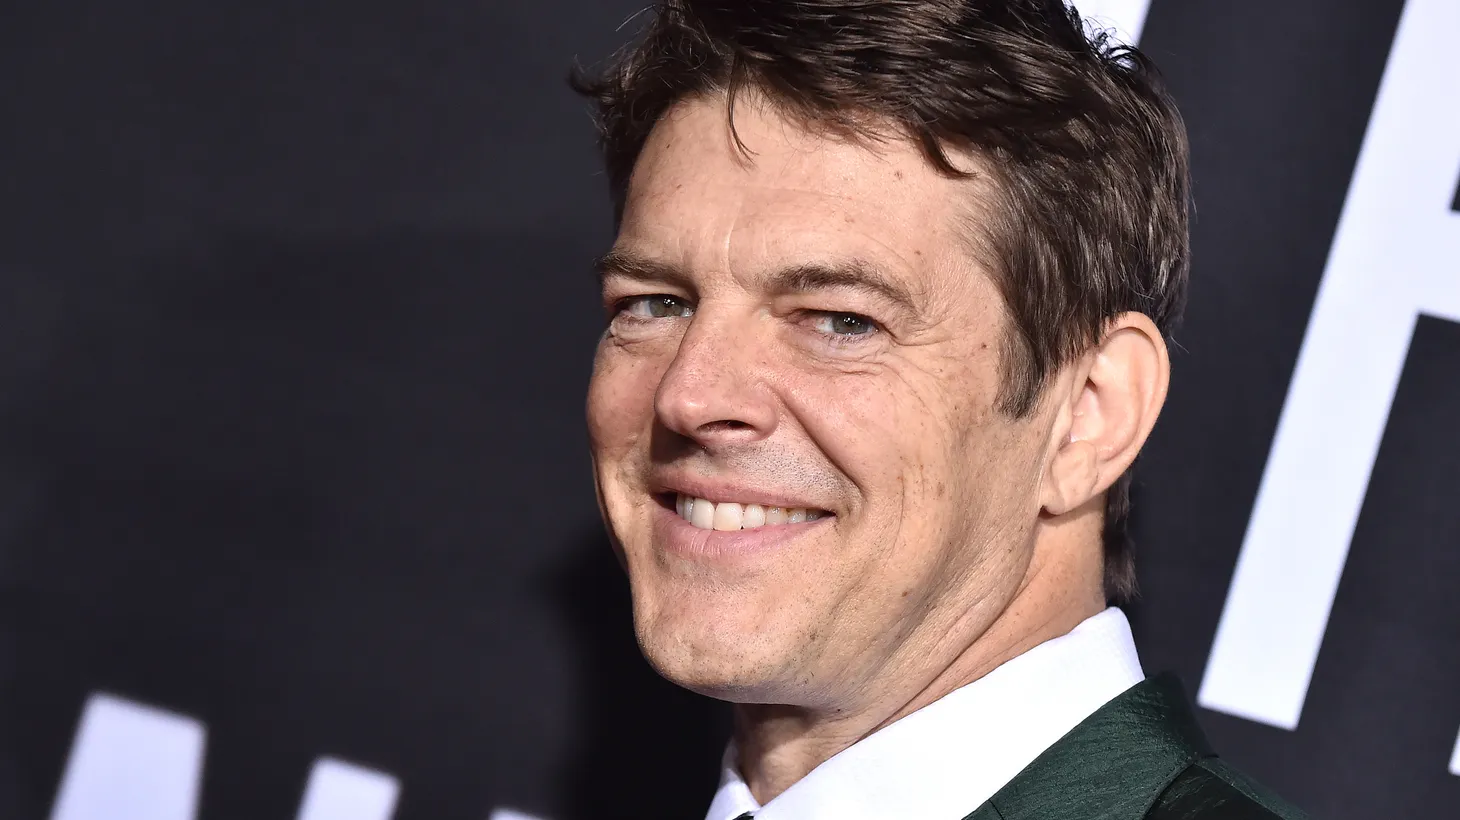 Blumhouse founder and CEO Jason Blum arrives for “The Invisible Man” premiere in Hollywood on February 24, 2022.